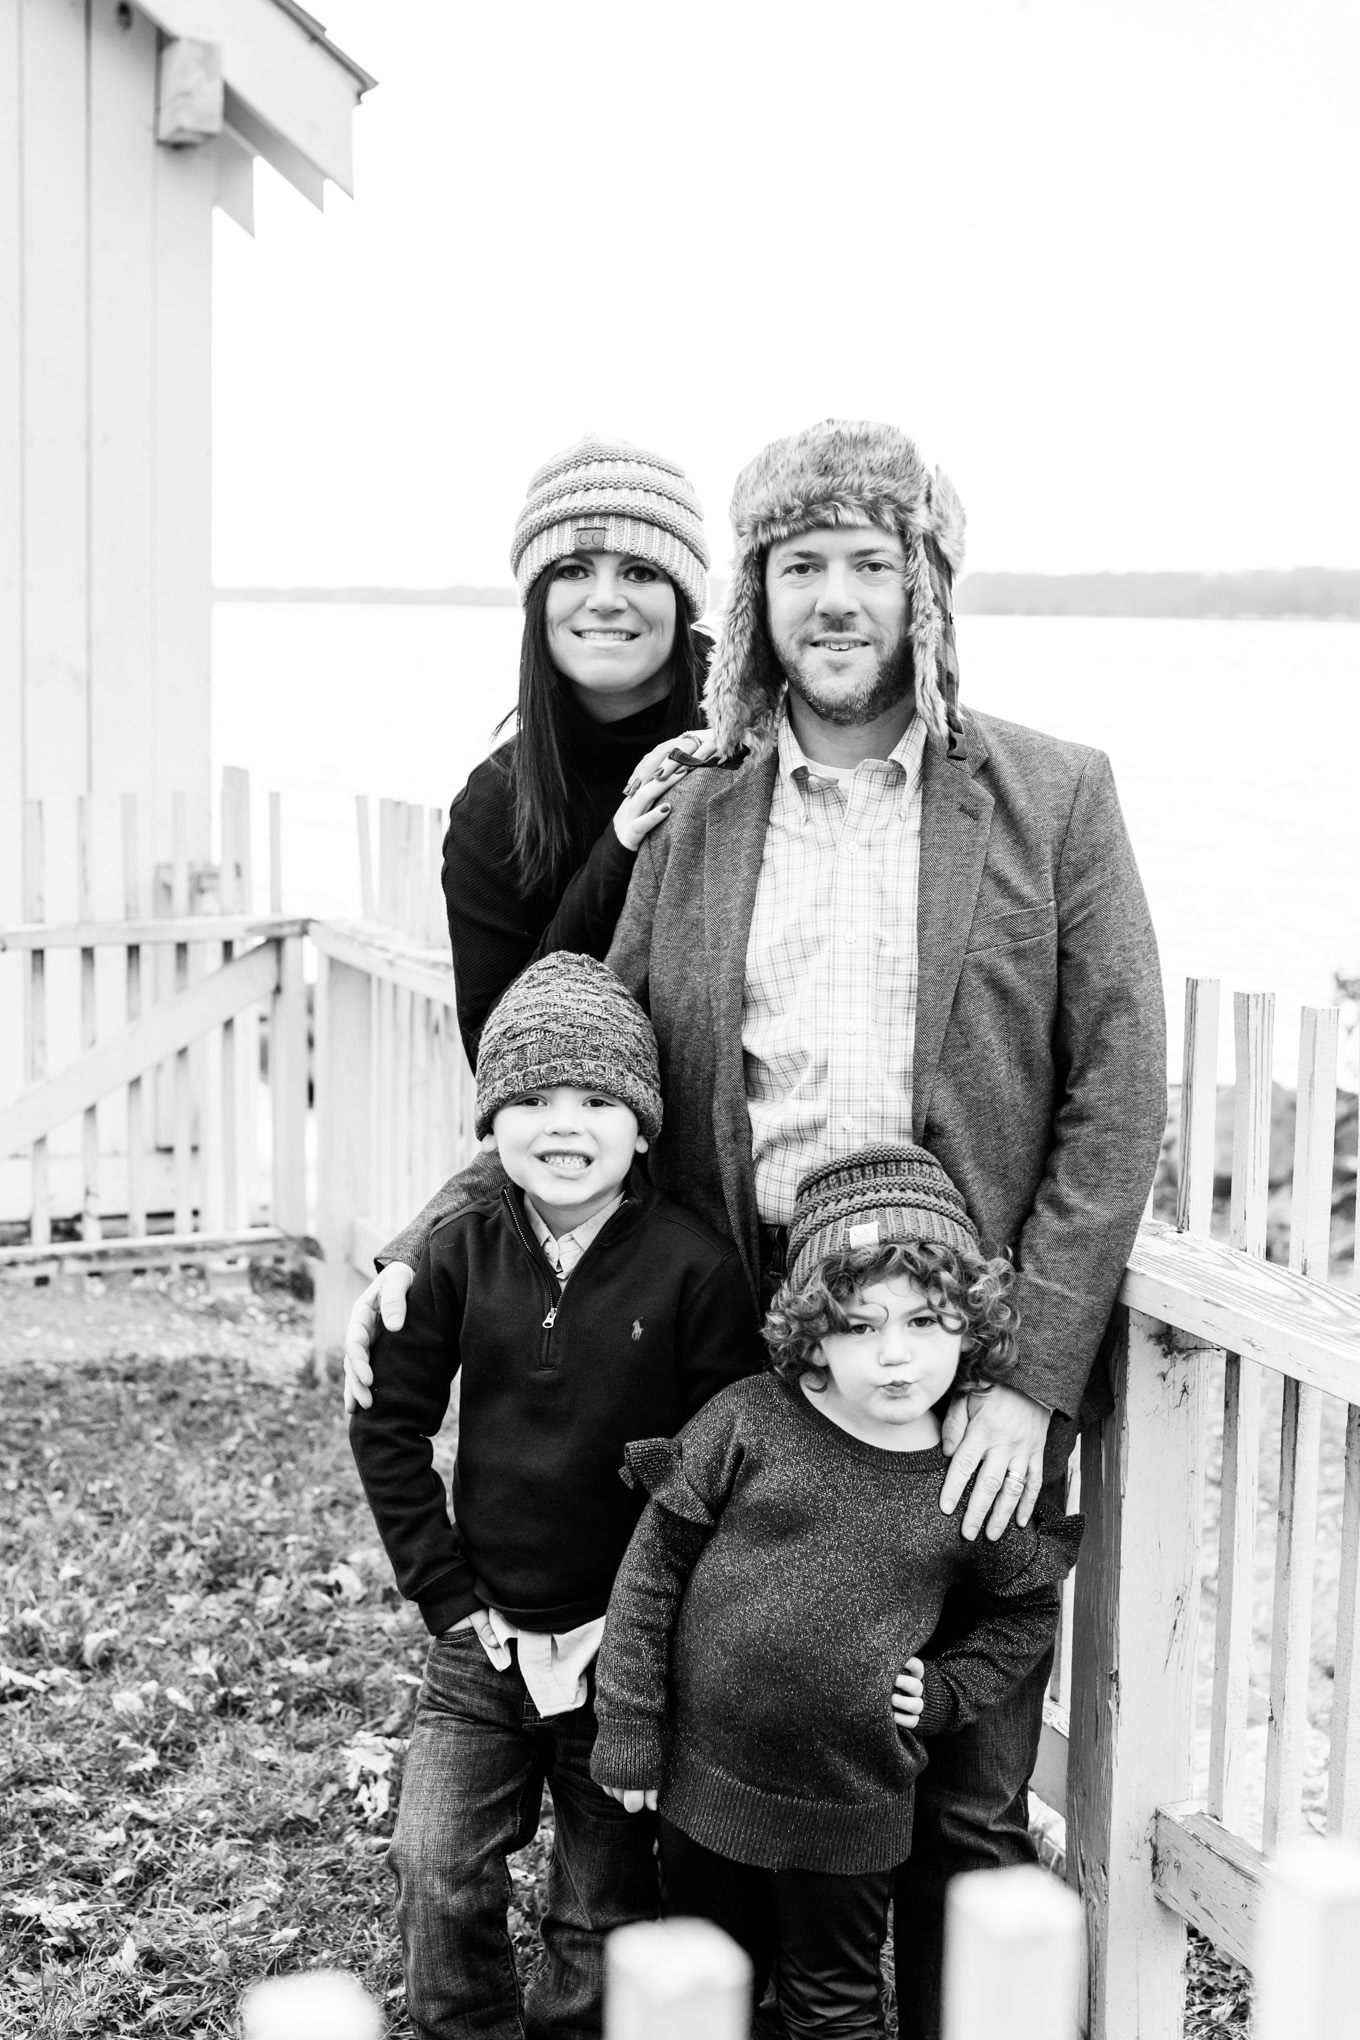 snow day, family of four, Jones Point Park, Alexandria, Old Town, northern Virginia, Potomac River, outdoor portraits, magic hour, black and white photos